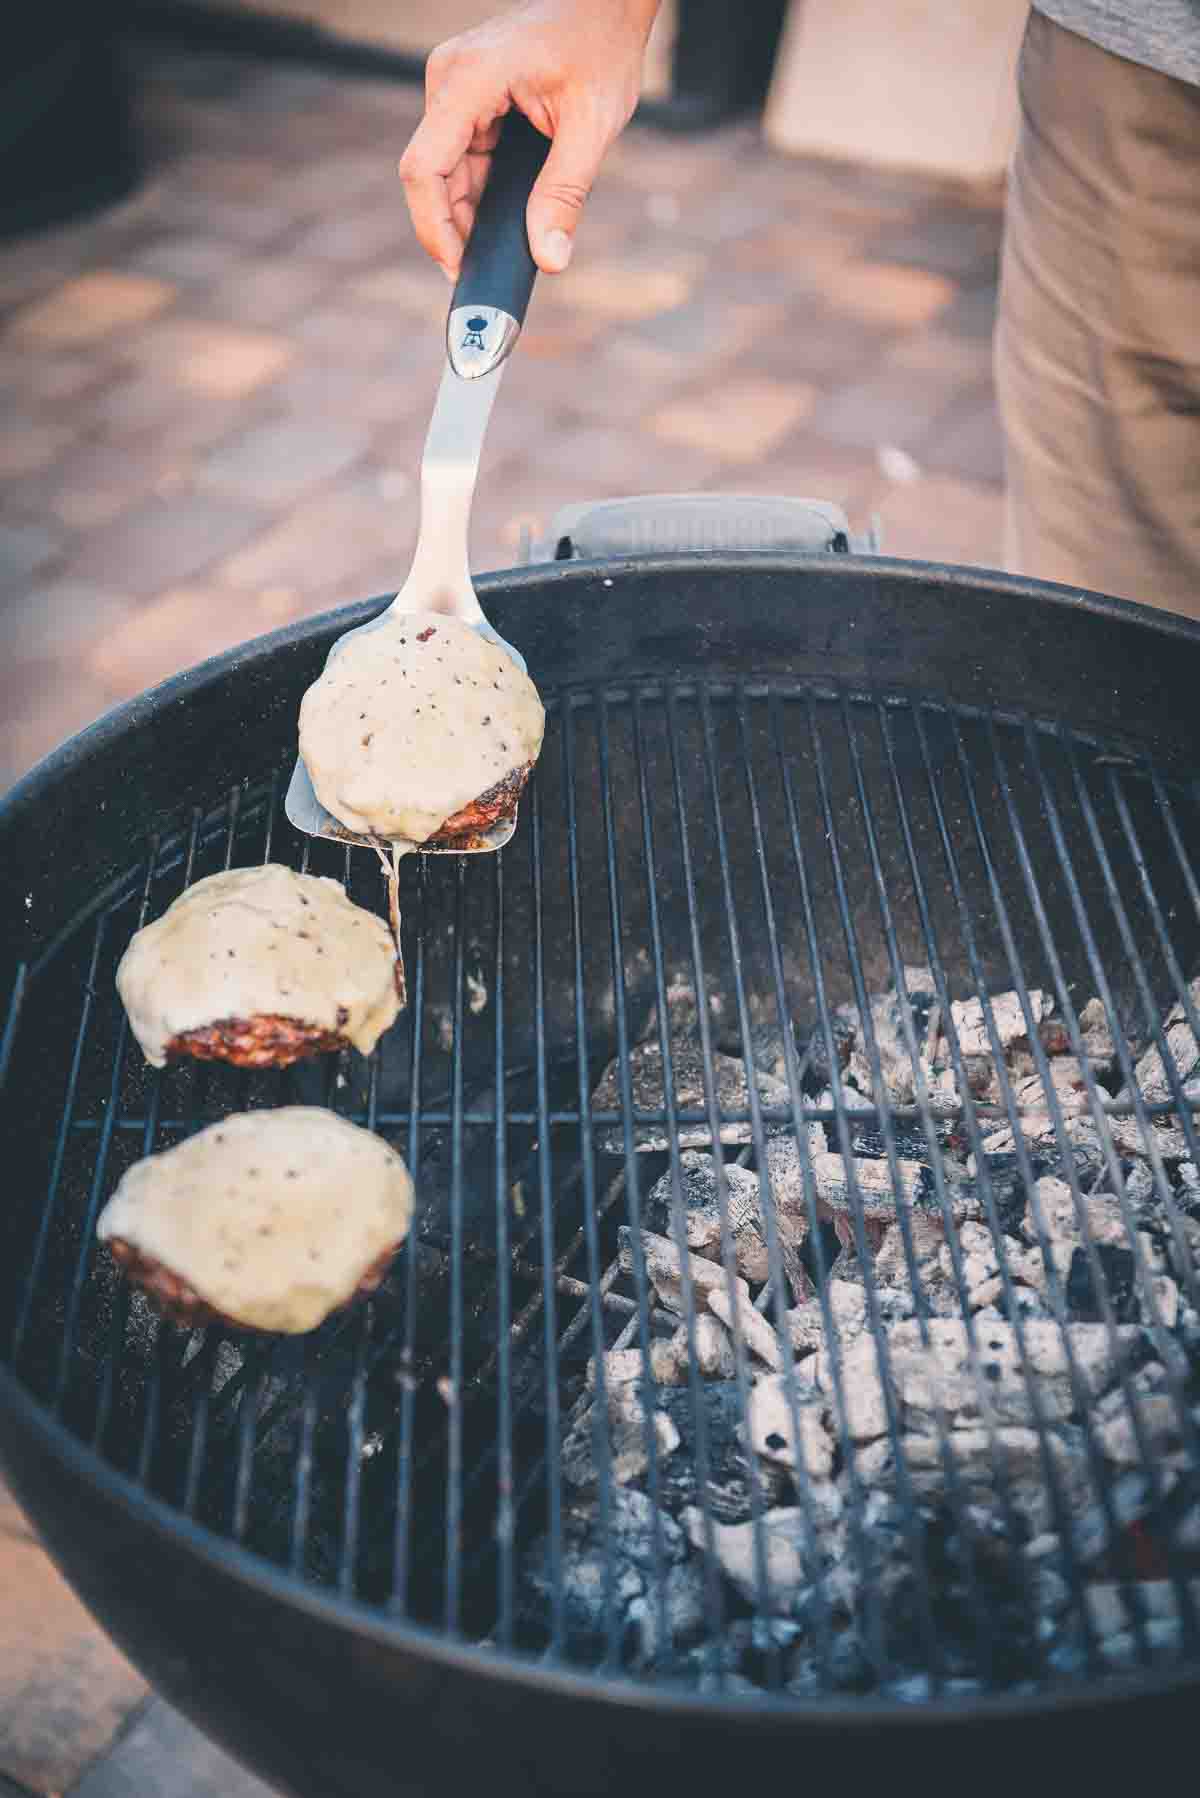 Spatula taking burgers topped with cheese off grill.